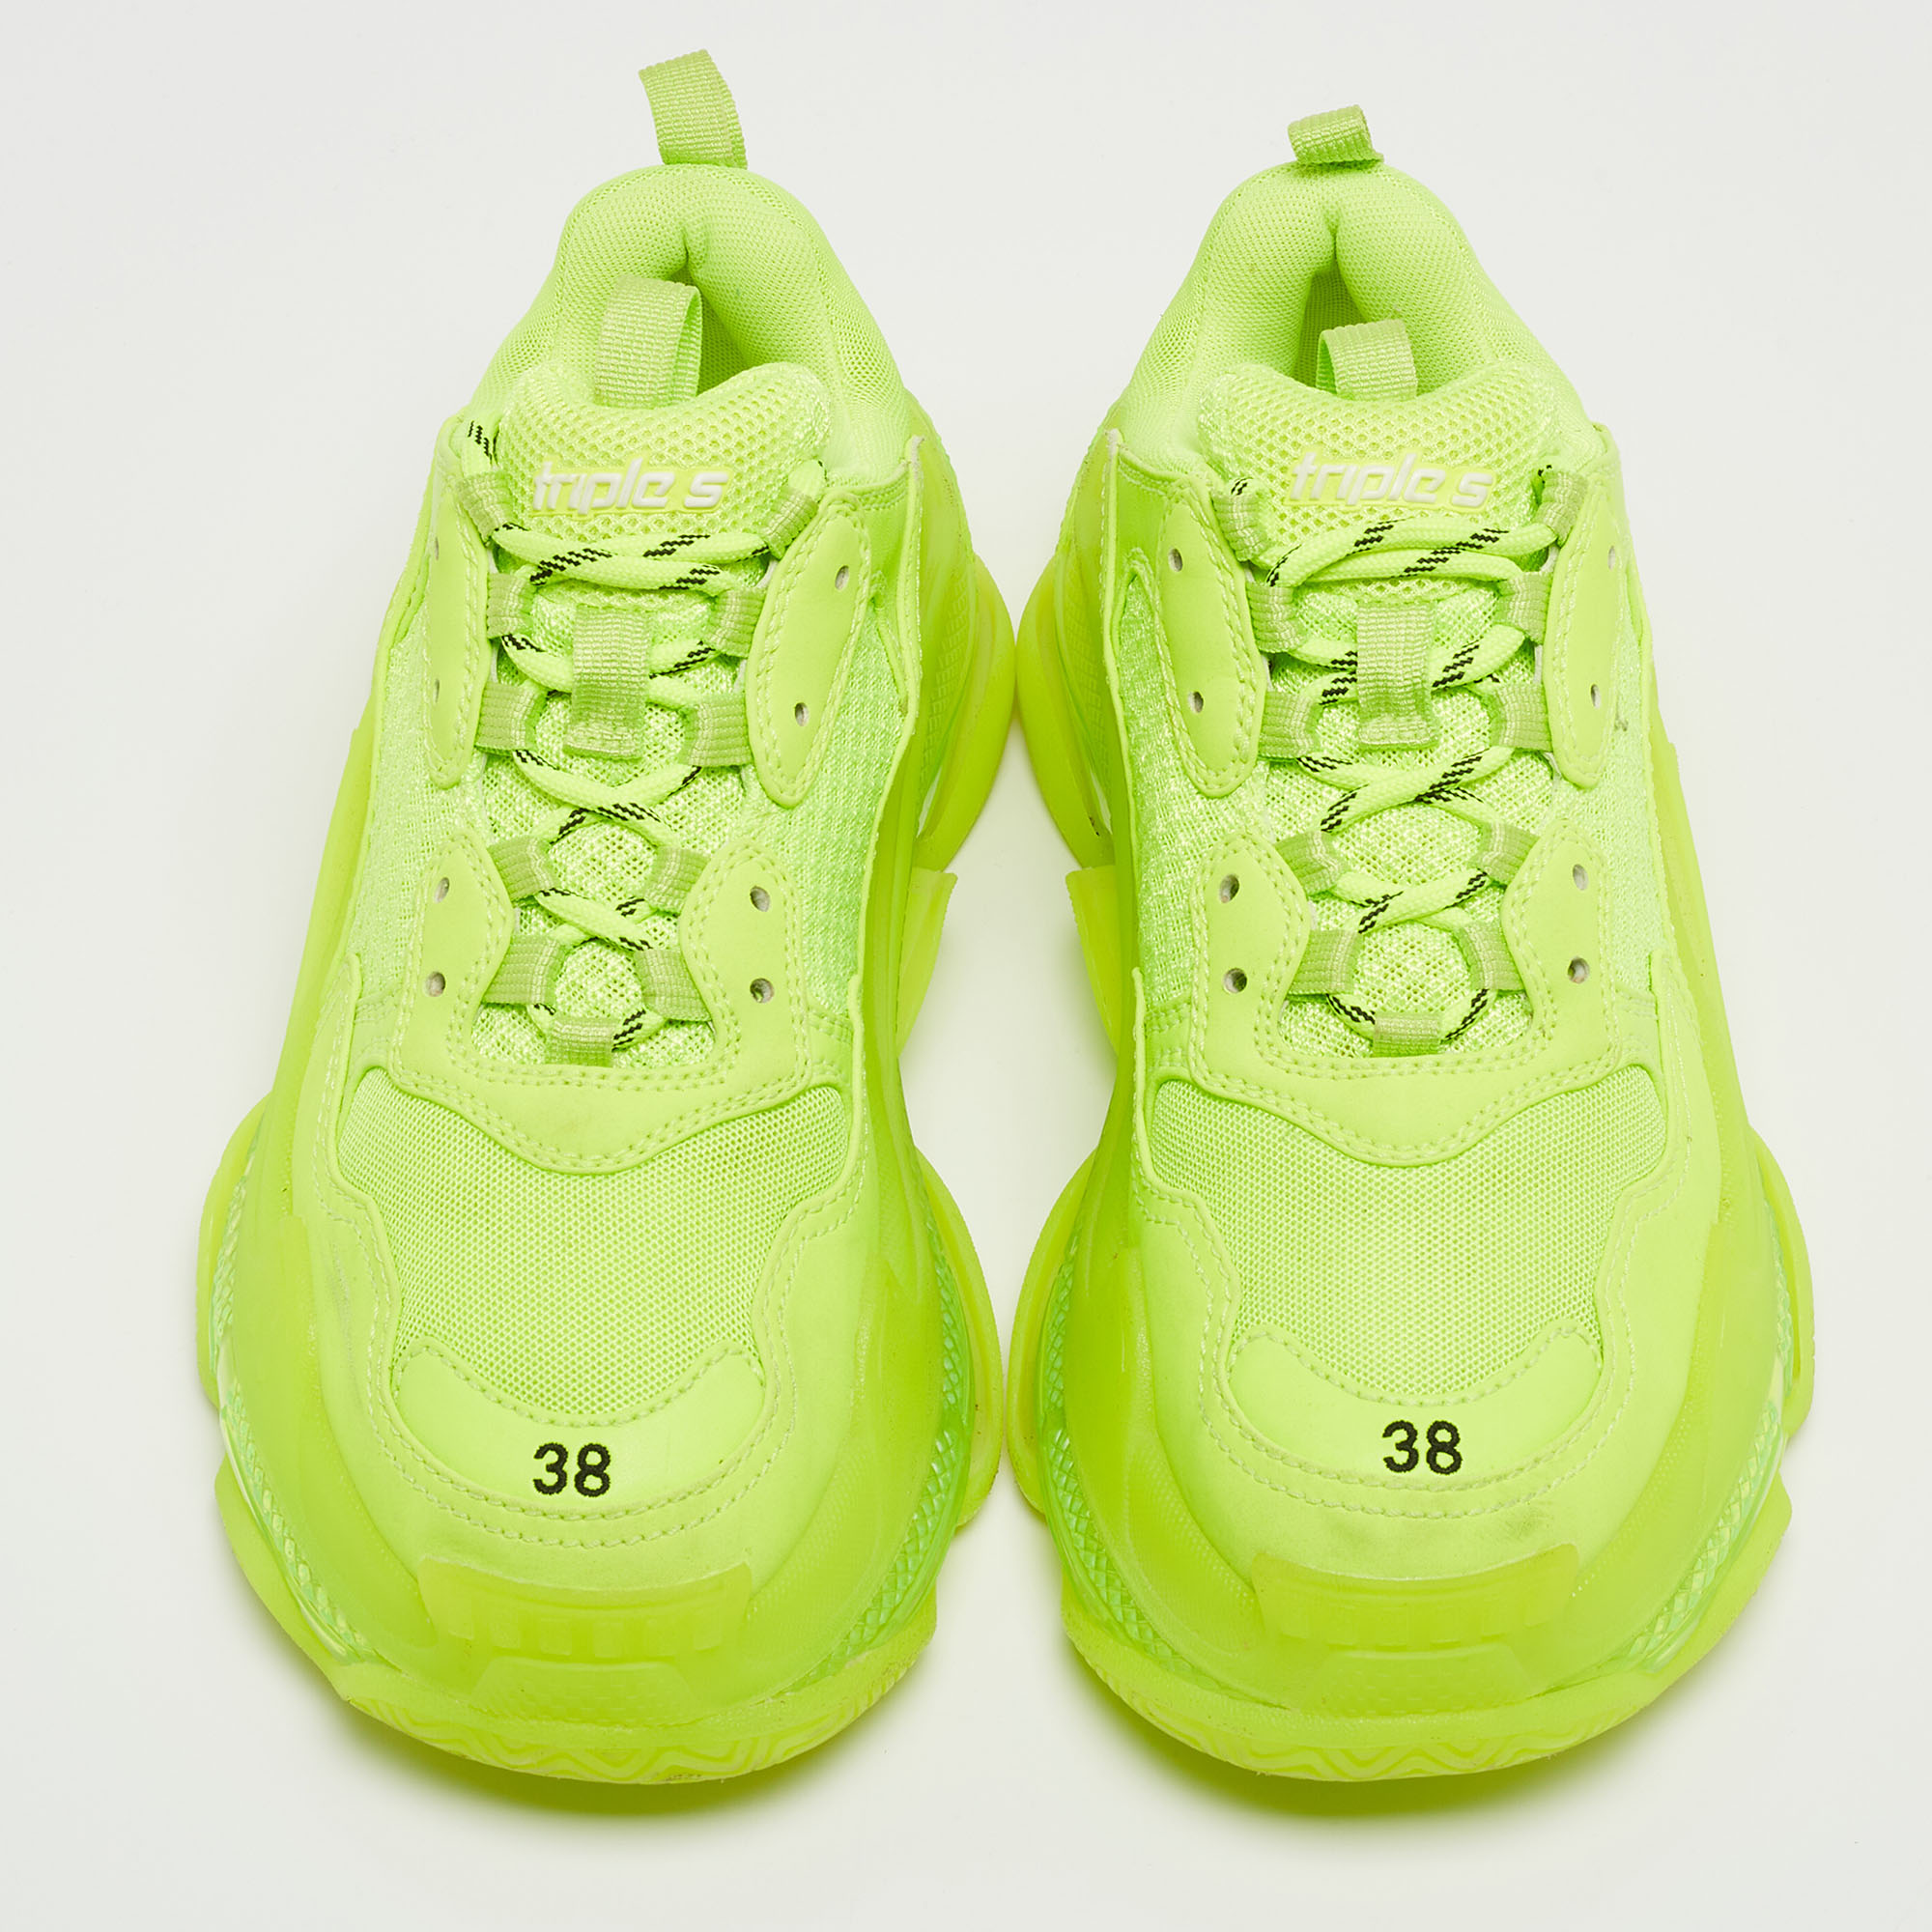 Balenciaga Neon Green Faux Leather And Mesh Triple S Low Top Sneakers Size 38